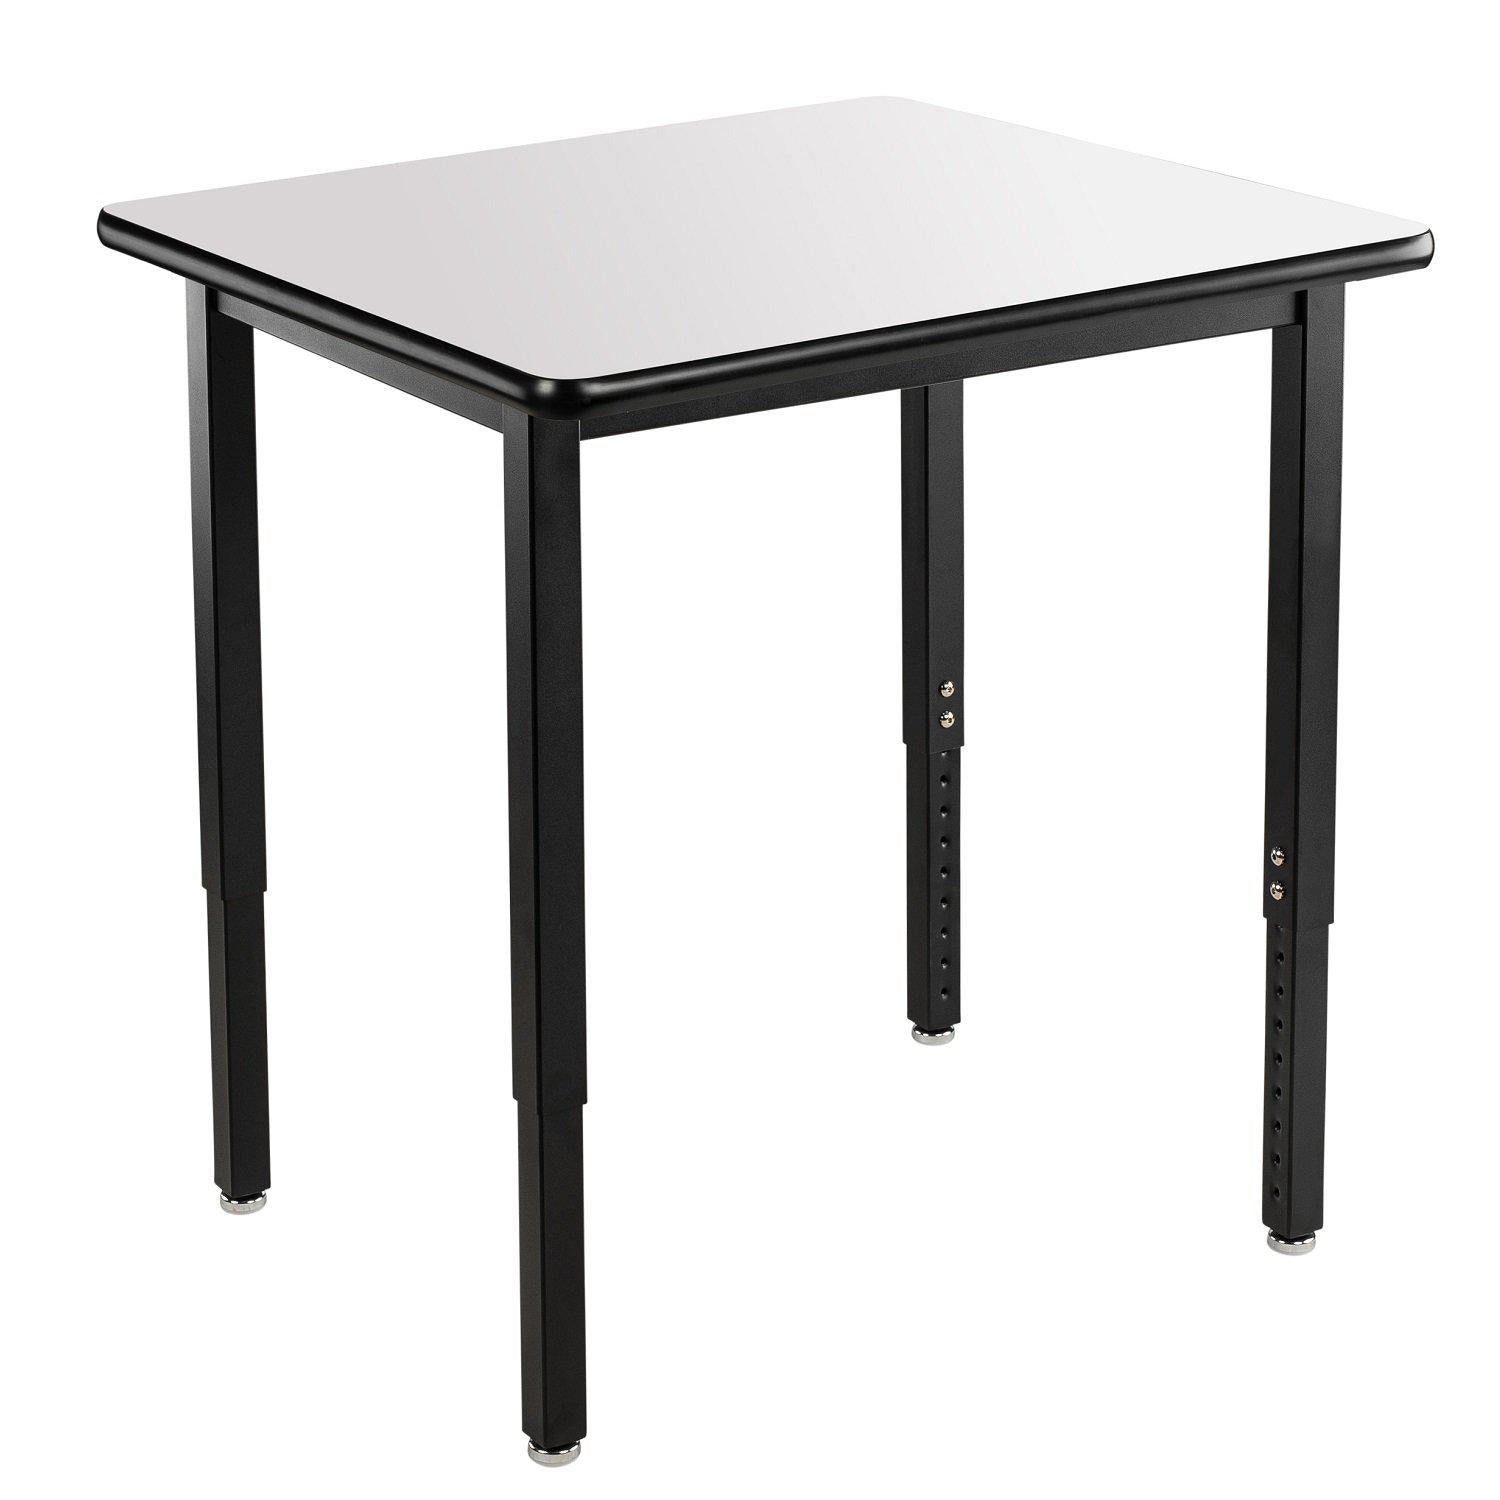 Heavy-Duty Height-Adjustable Utility Table, Black Frame, 24" x 30", Whiteboard High-Pressure Laminate Top